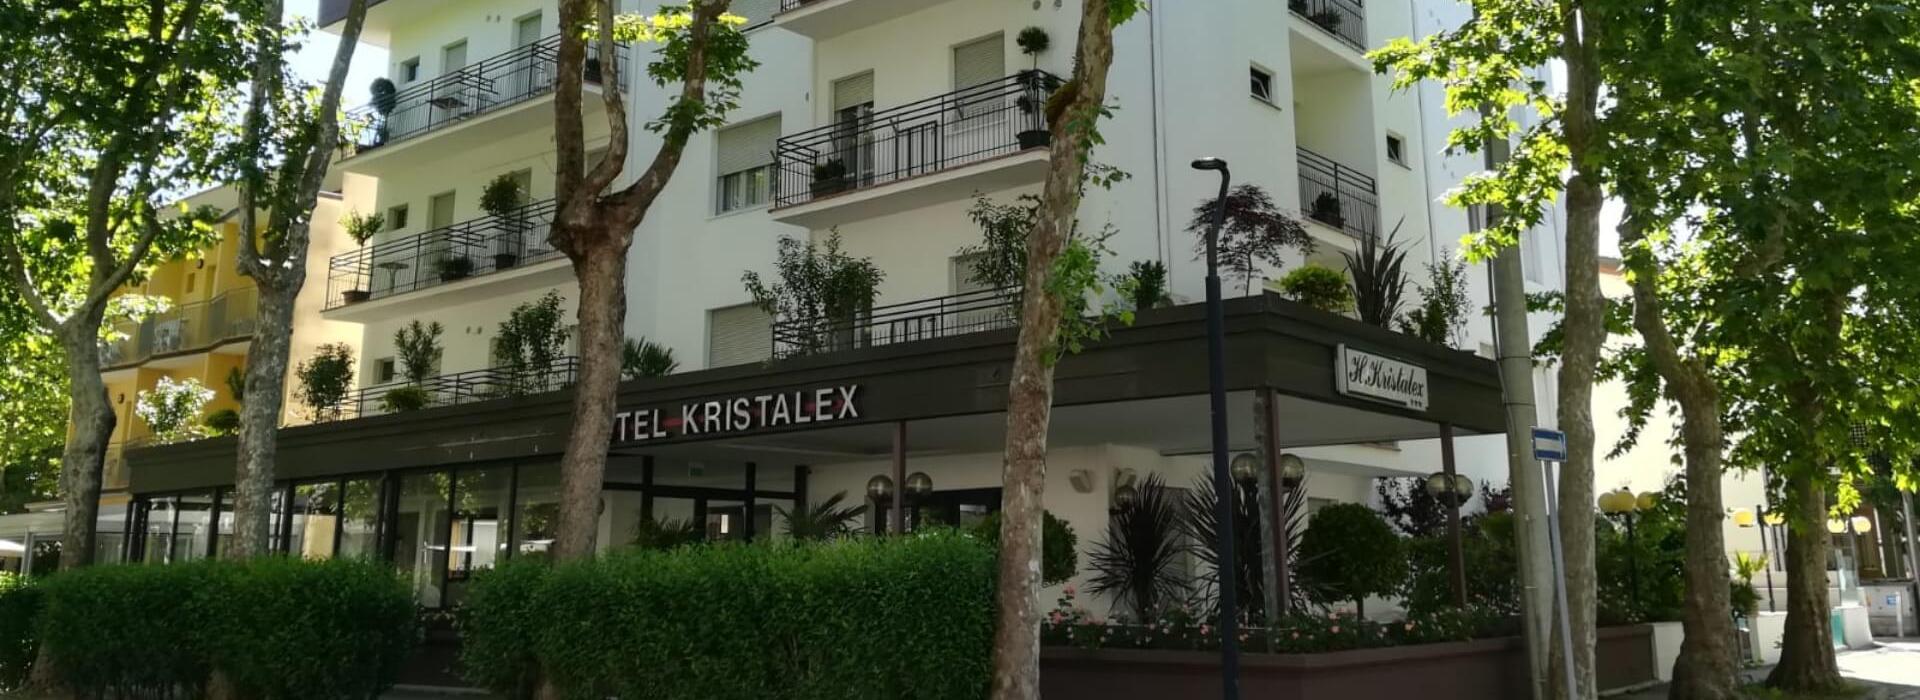 hotelkristalex en offer-may-in-hotel-with-many-pet-friendly-services-in-cesenatico 017